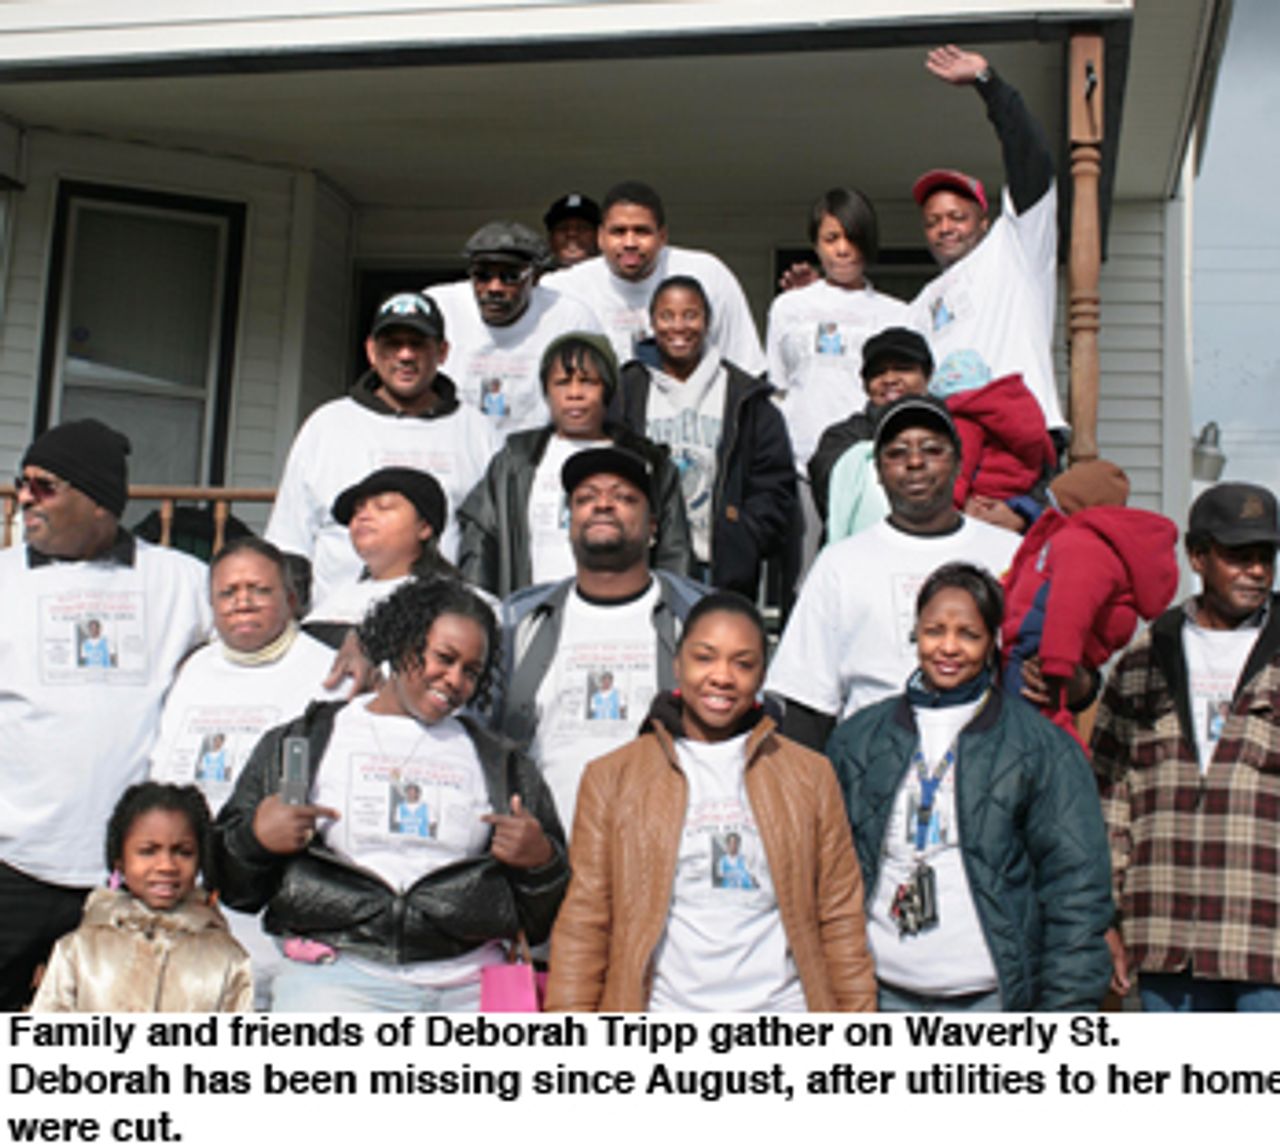 The family and friends of Deborah Tripp, missing since August